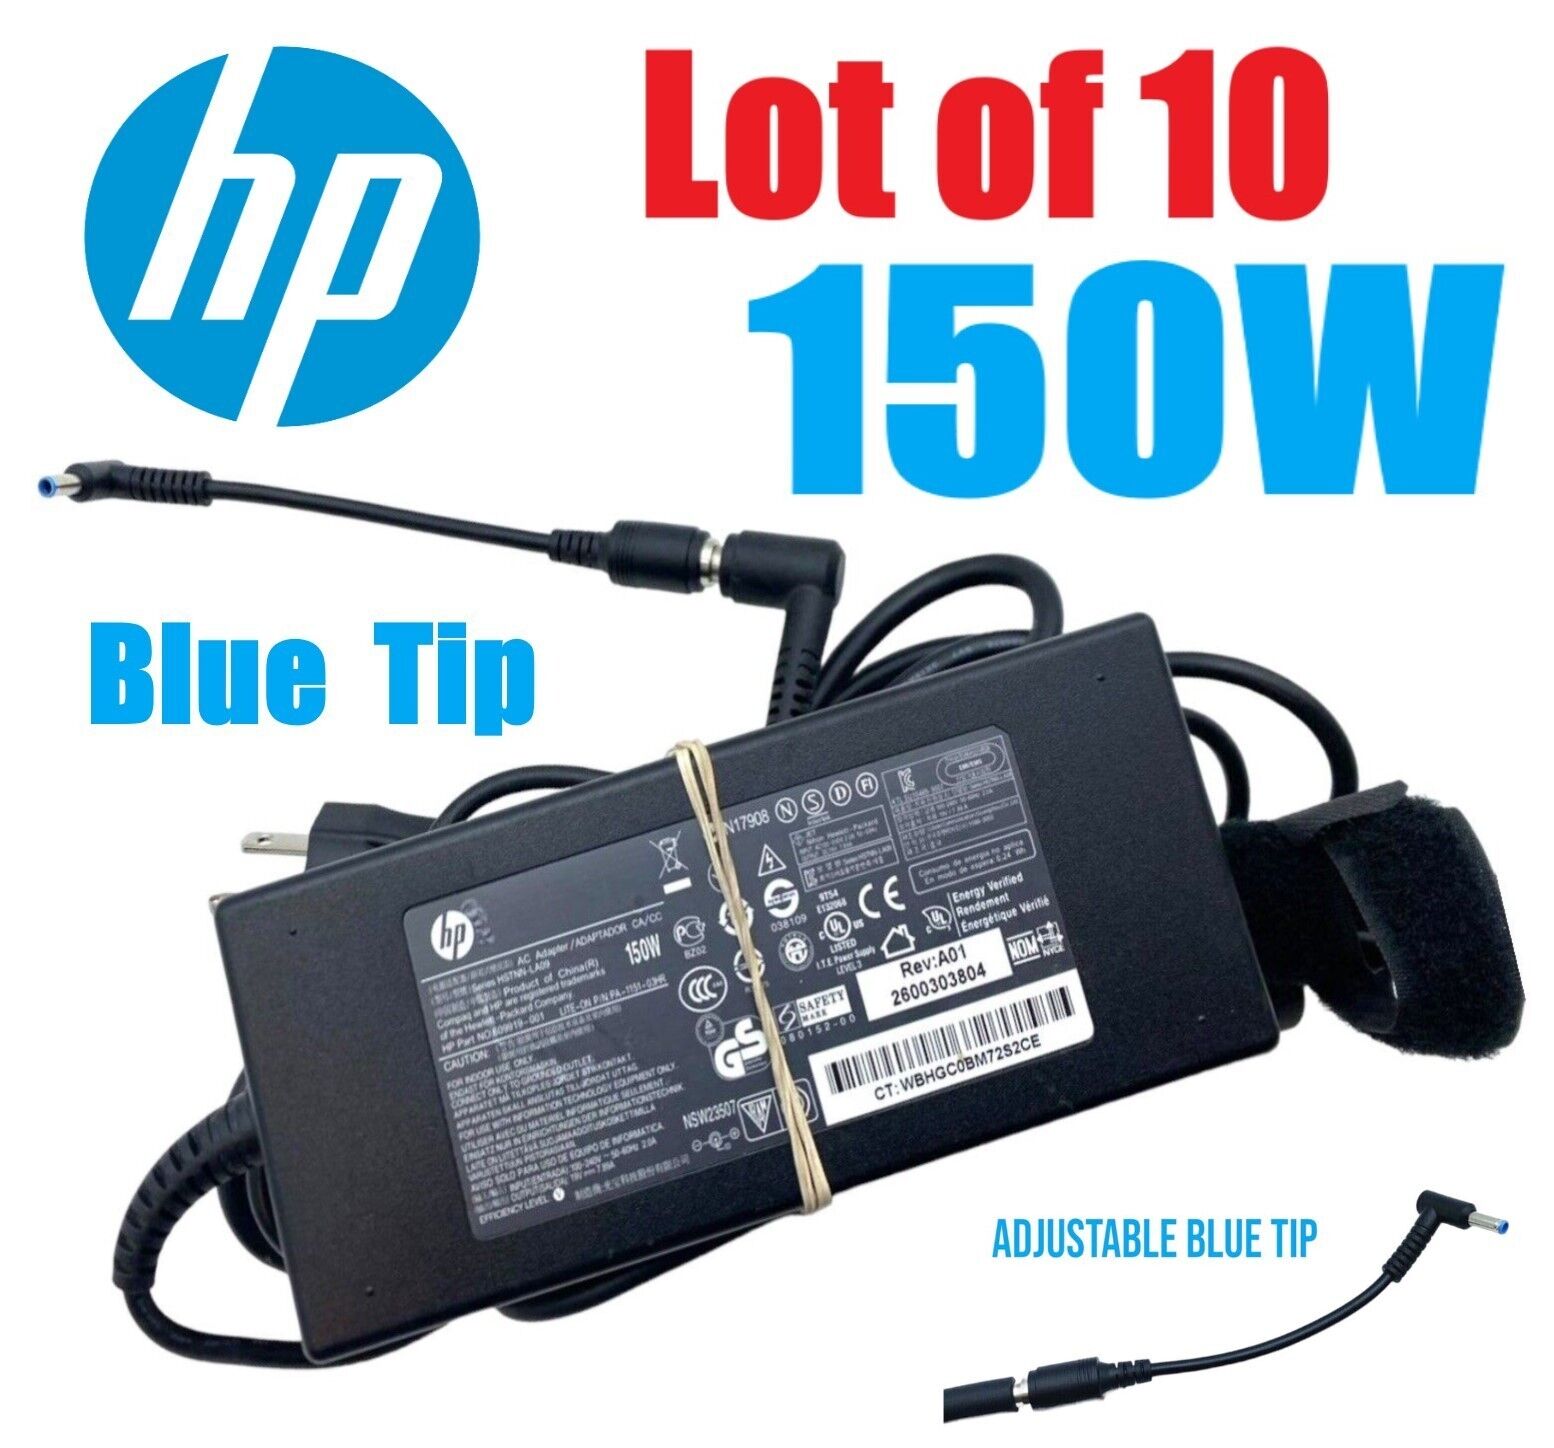 LOT OF 10 150W 19.5V 7.7A Laptop AC Adapter Charger For HP ZBook 15 G3 G4 G5 G6